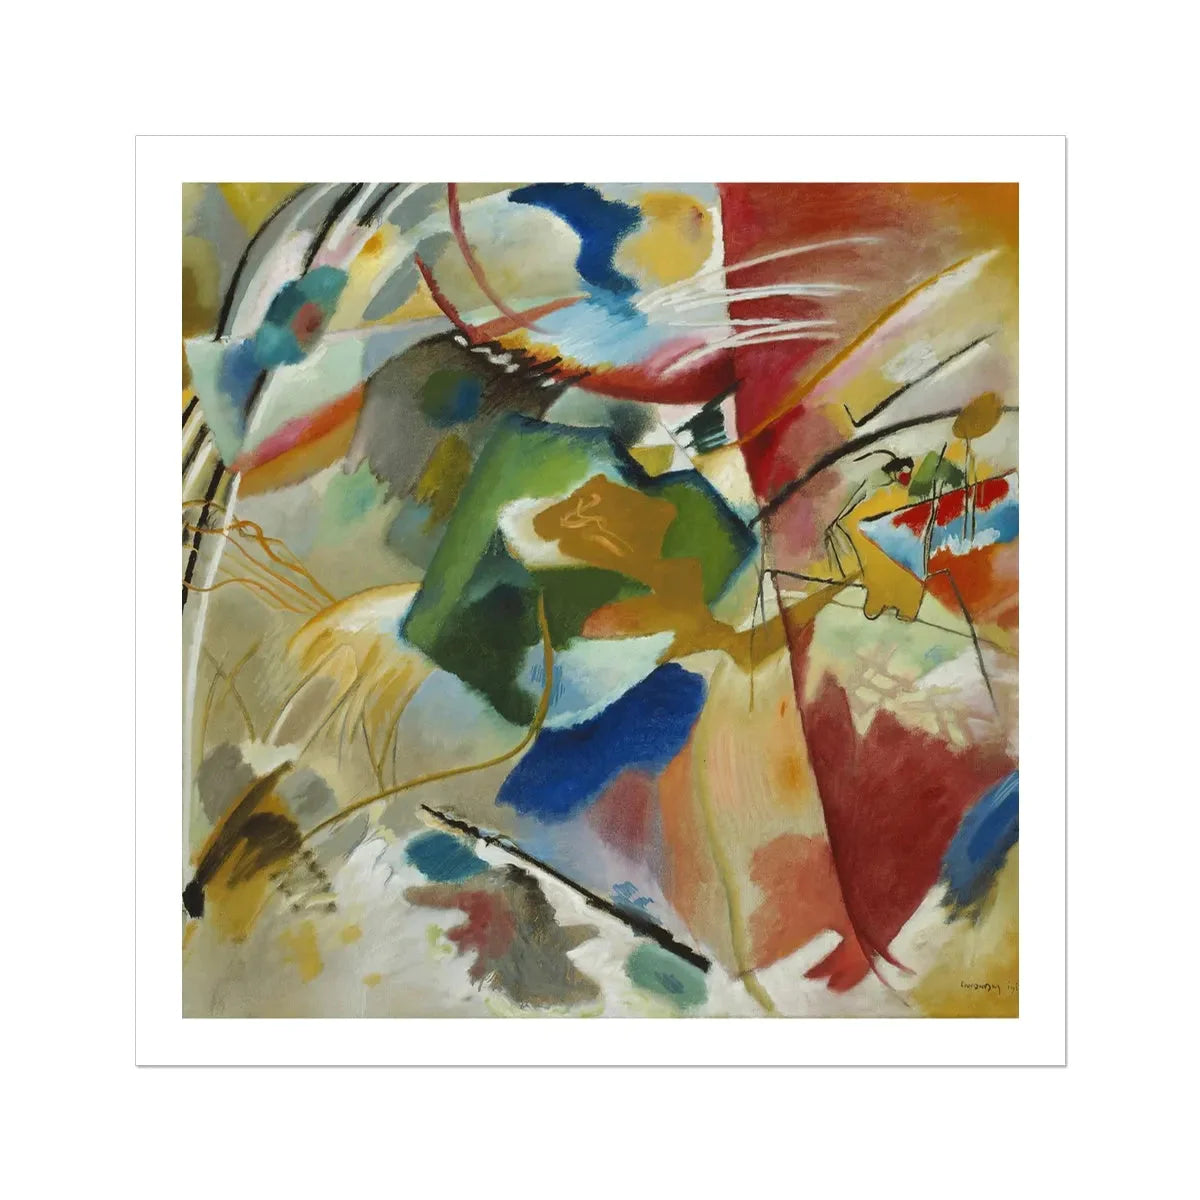 Painting With Green Center By Wassily Kandinsky Fine Art Print - 30’x30’ - Posters Prints & Visual Artwork